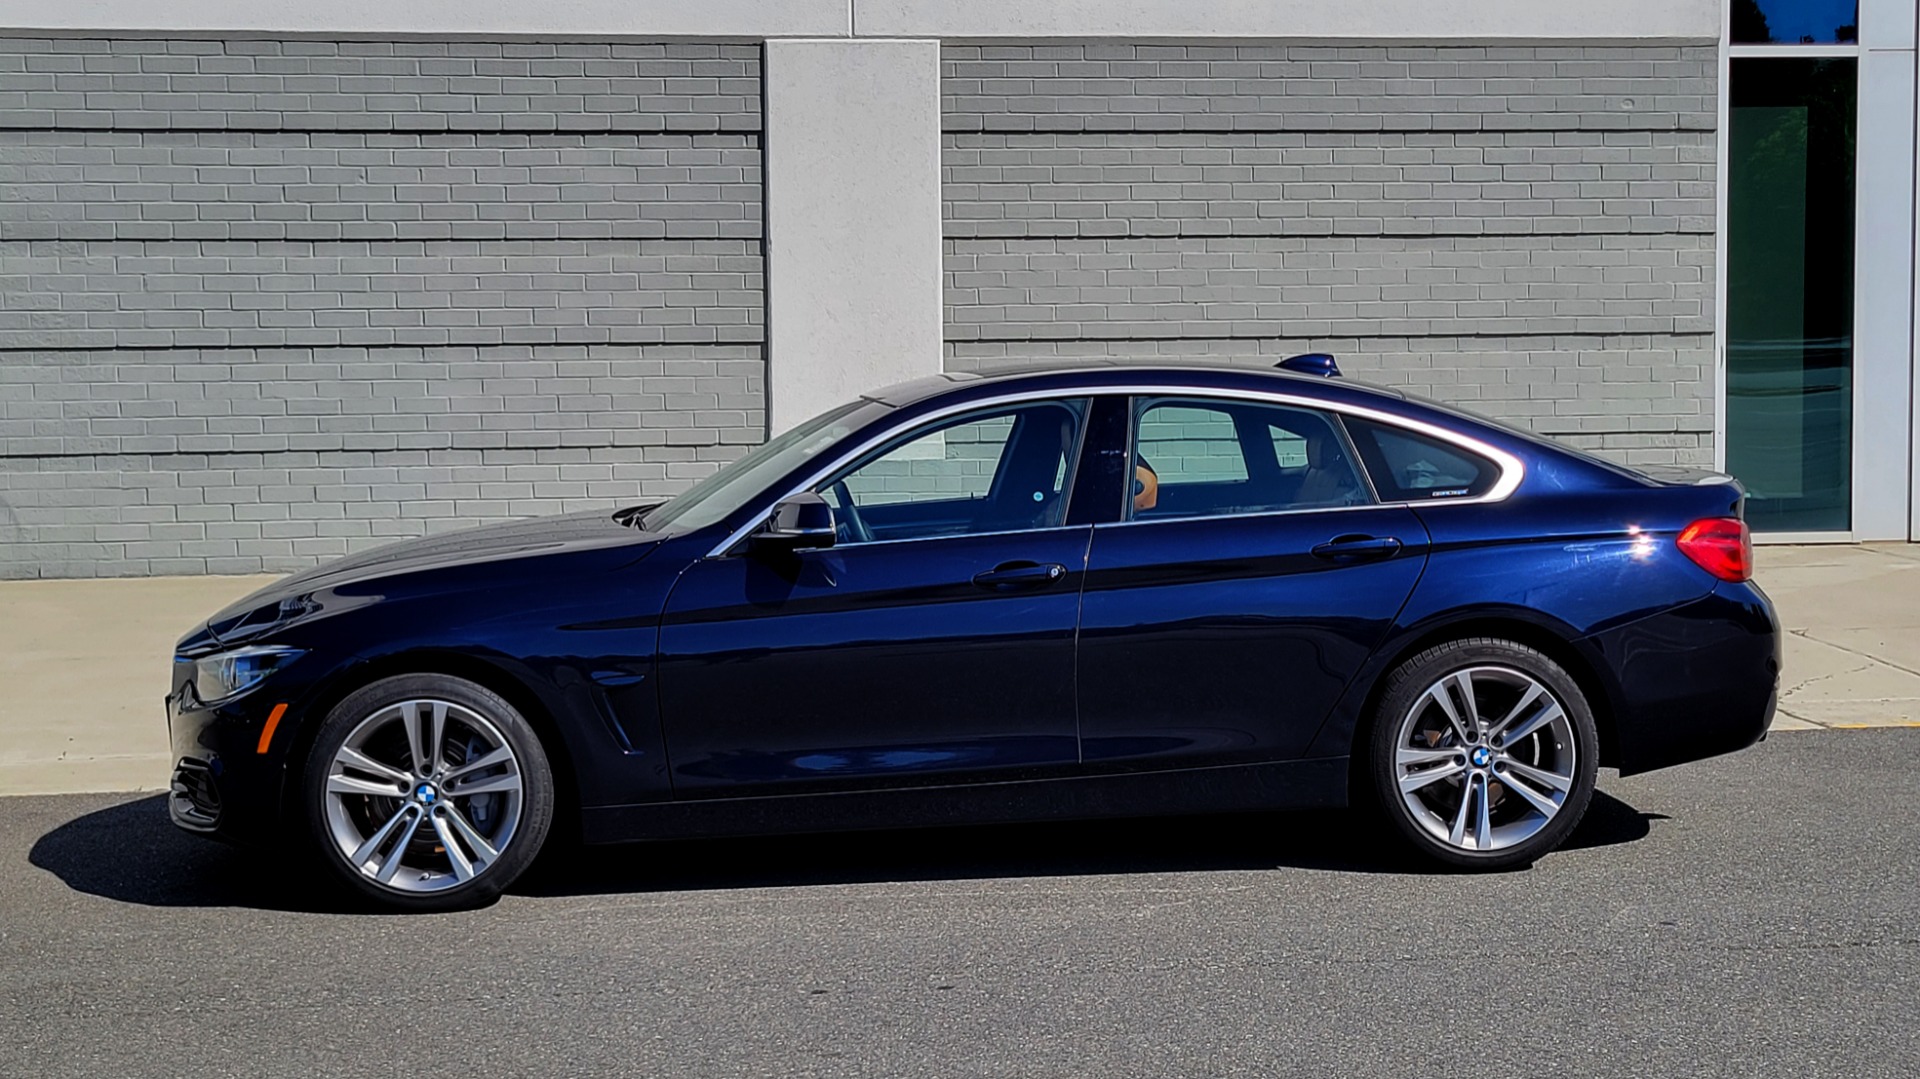 Used 2019 BMW 4 SERIES 440I XDRIVE GRAN COUPE / 3.0L / CONV PKG / HTD STS / REARVIEW for sale $33,999 at Formula Imports in Charlotte NC 28227 4